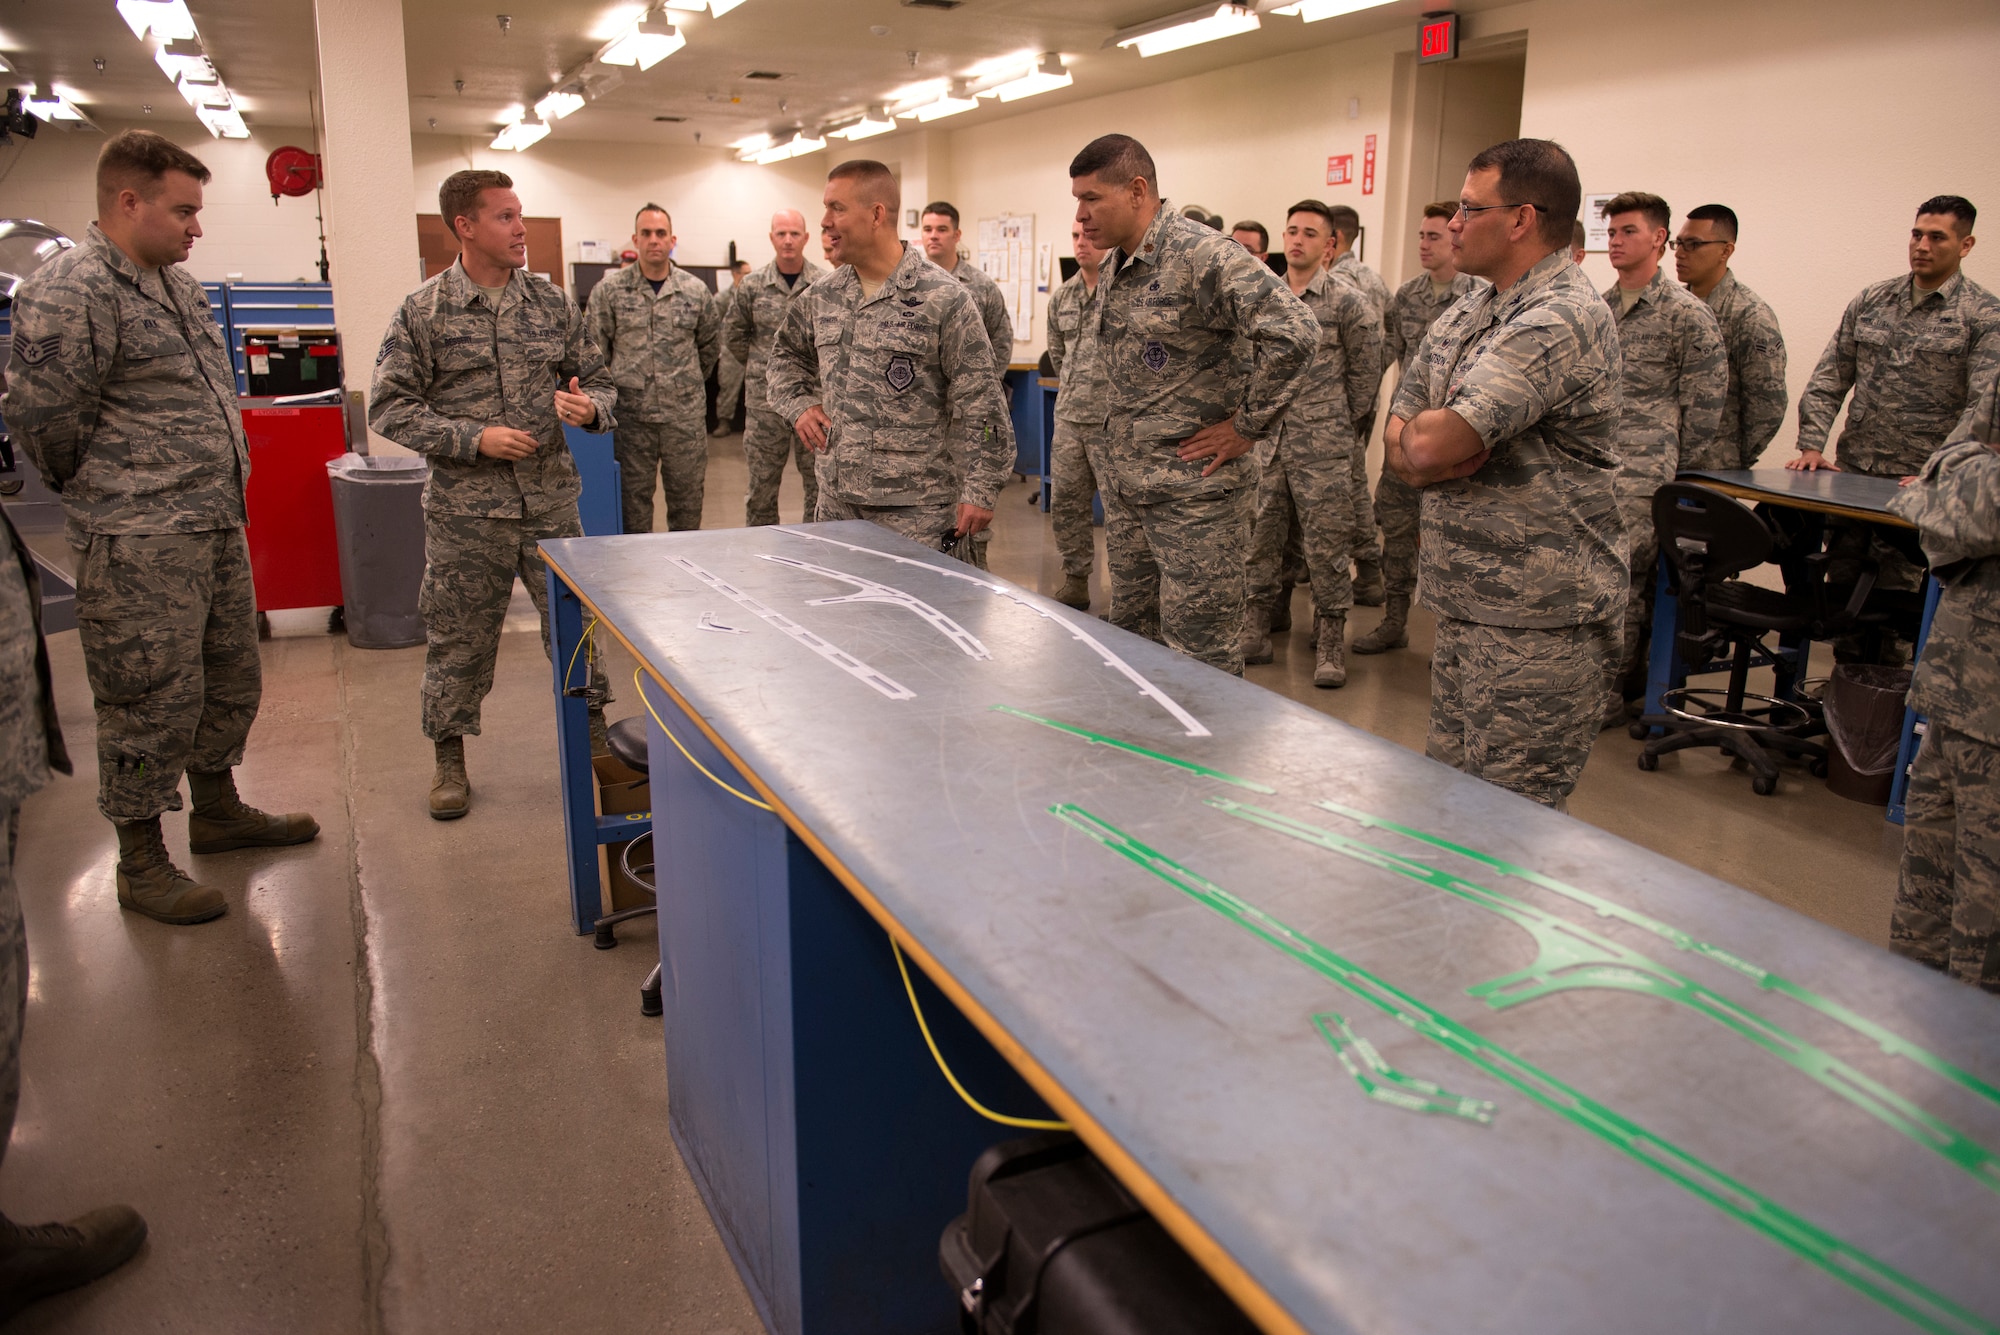 Staff Sgt. Ryan Bessery, 56th Component Maintenance Squadron Egress technician, second from left, briefs Brig. Gen. Brook Leonard, 56th Fighter Wing commander, fifth from left, on new measurement templates for F-35 Lightning II canopy maintenance produced in house April 13, 2018, at Luke Air Force Base, Ariz. Along with other innovations, the egress section has used in-house production of the templates to significantly reduce the replacement time on flexible linear shaped charges in F-35 canopies. (U.S. Air Force photo by Senior Airman Ridge Shan)